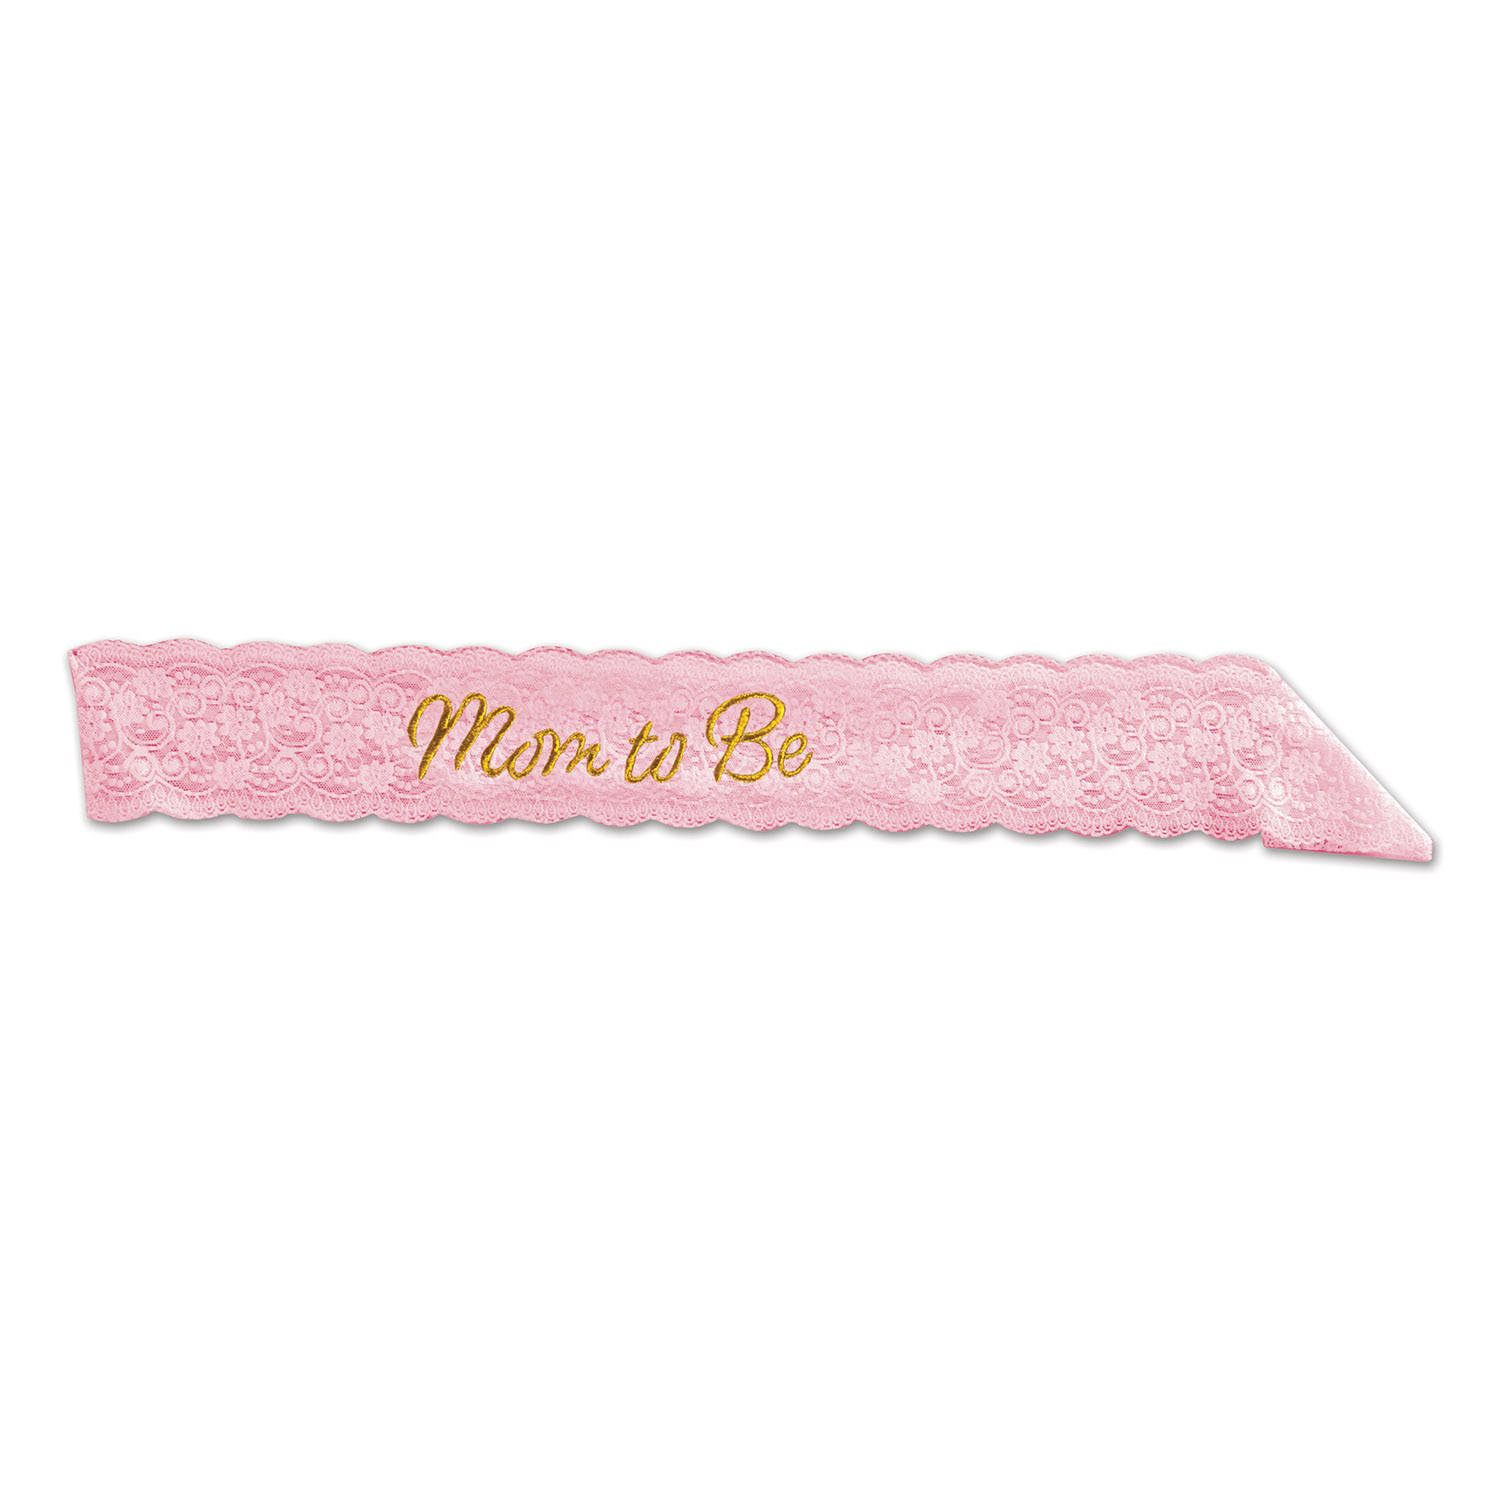 Mom To Be Lace Sash